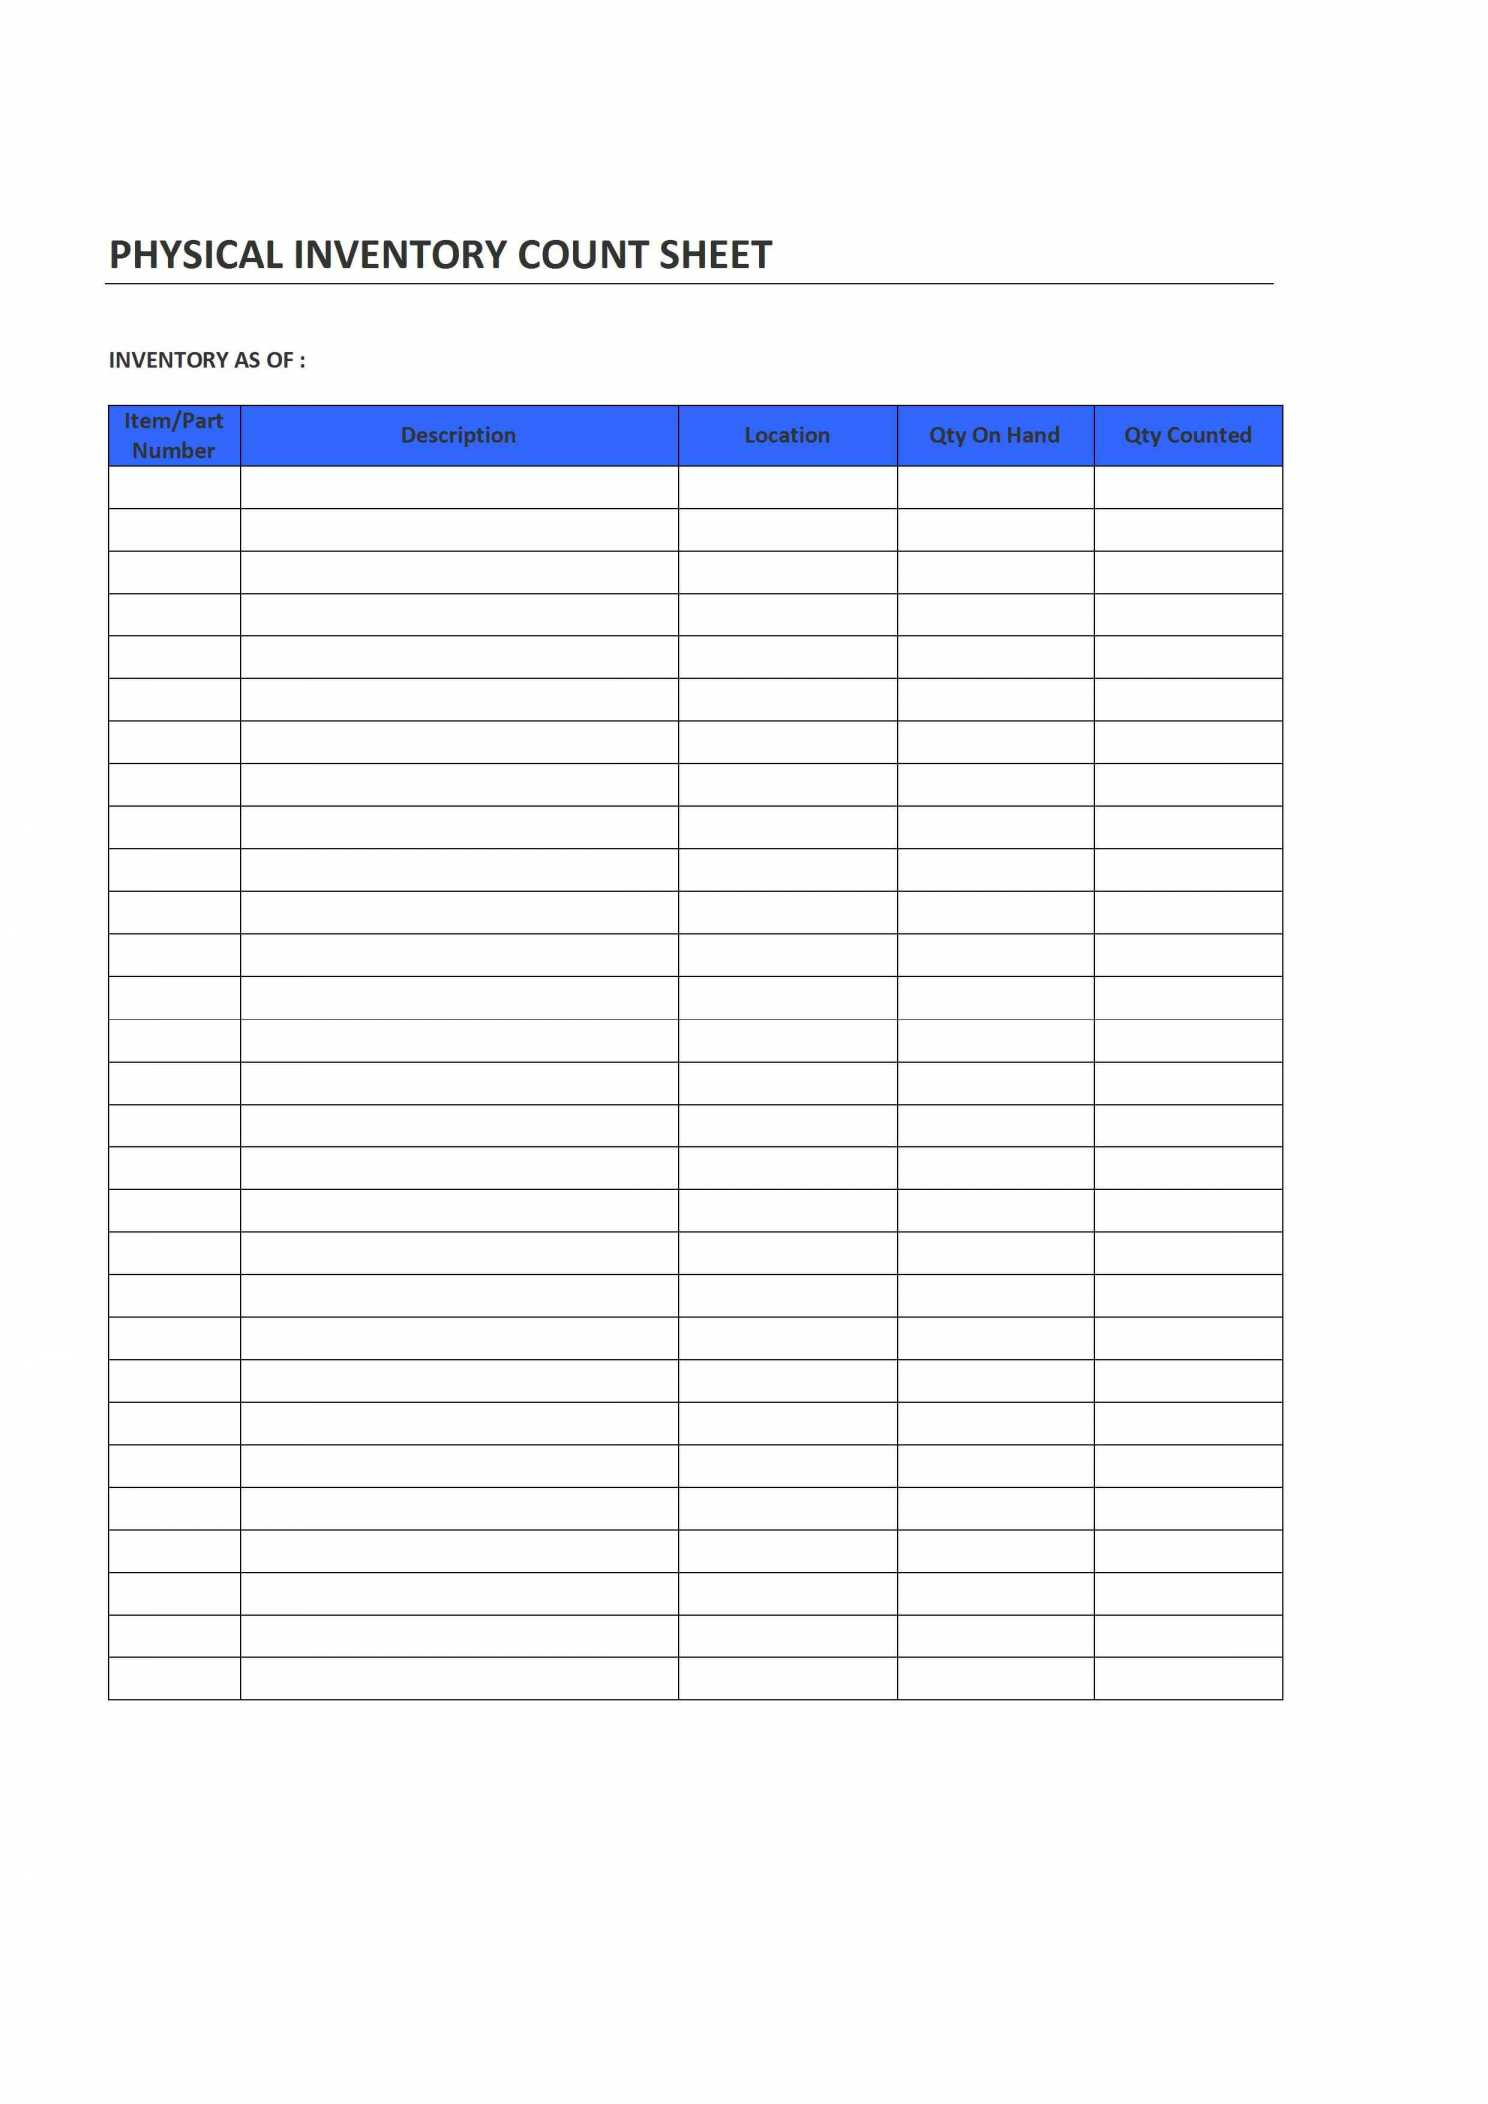 Inventory Management Excel Template Free Download Printable intended for Excel Inventory Management Template Download